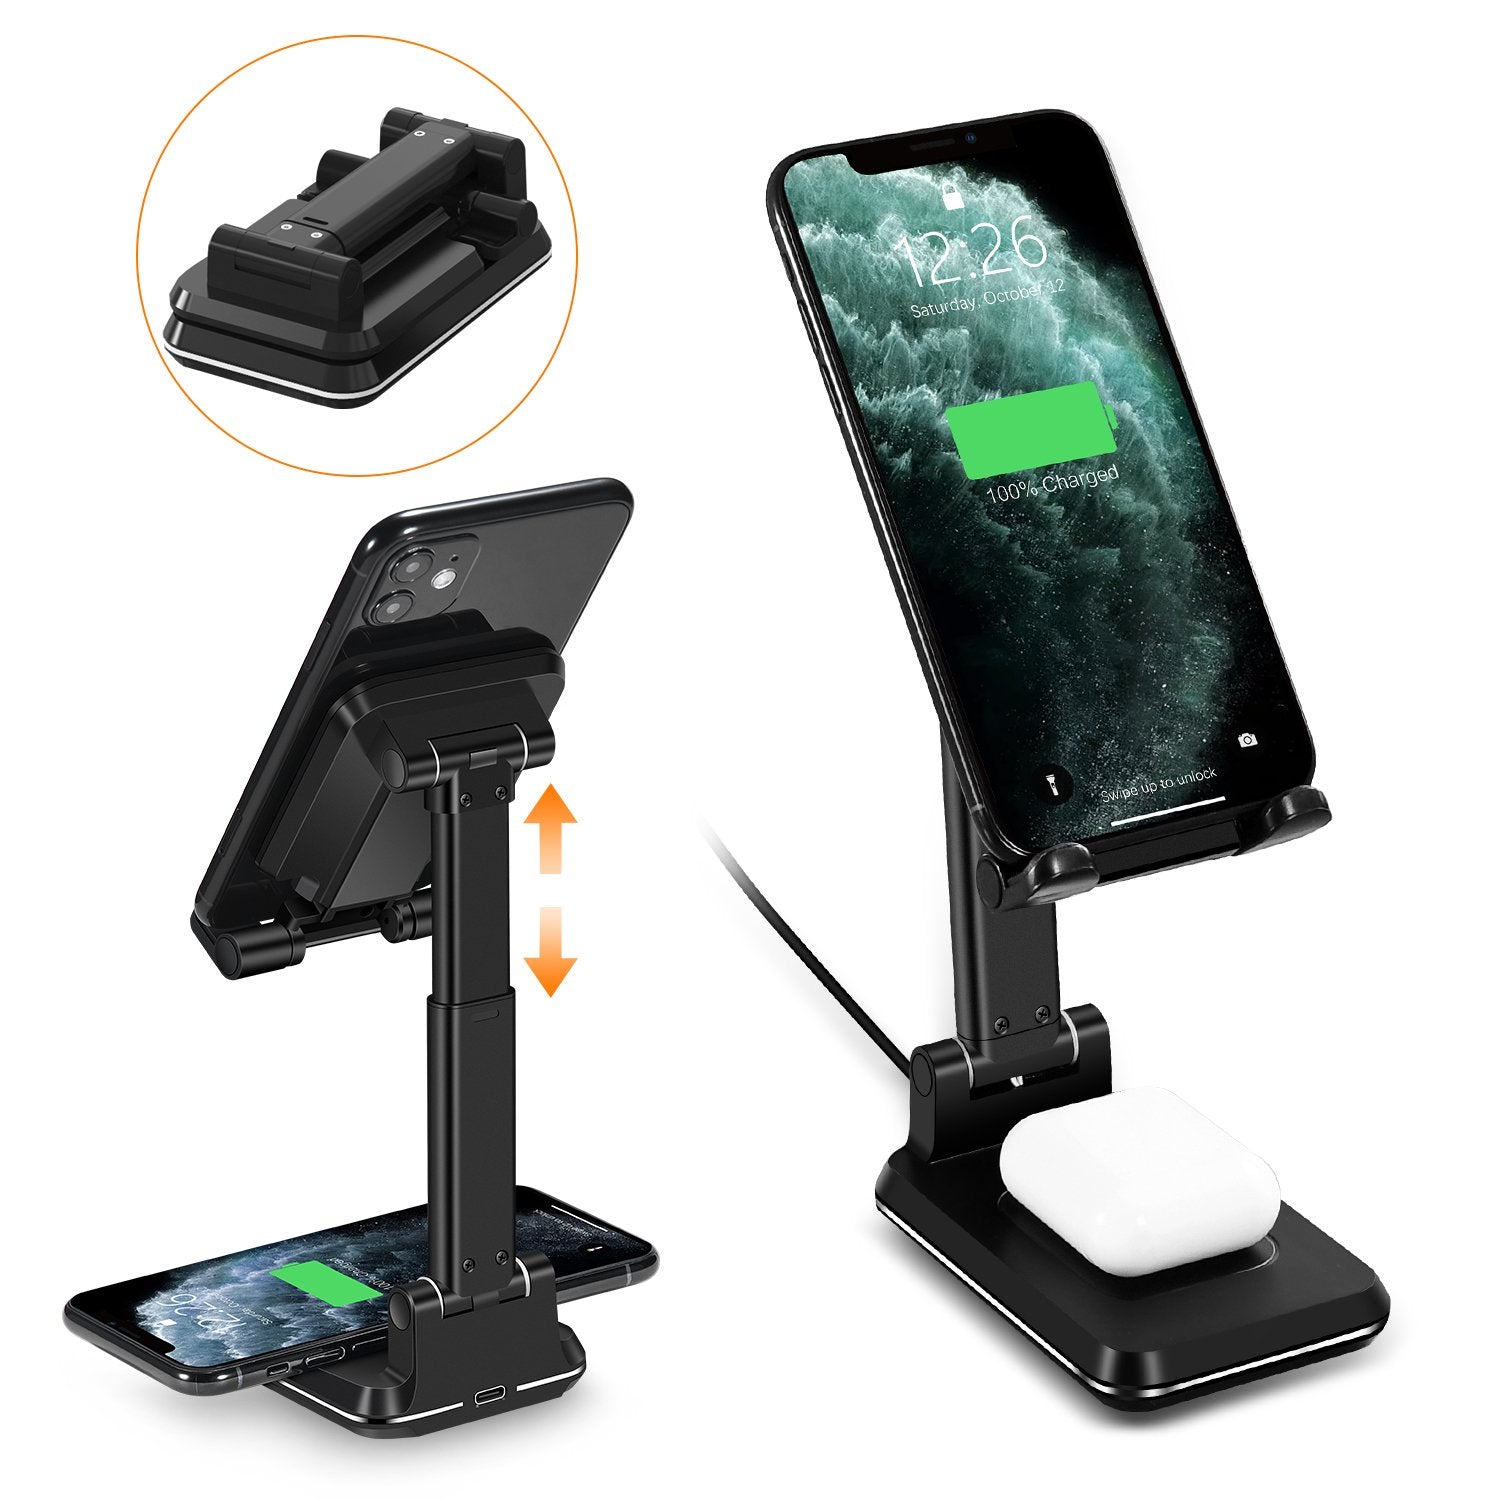 Cell Phone Stand Wireless Charger for Desk-WALOTAR Dual 10W Qi Fast Wireless Charging Foldable Angle&Height Adjustable Phone Holder for iPhone 11/Pro/Max/X/XR/XS Max/8/AirPods/Pro,Galaxy S20/S10/S9/S8